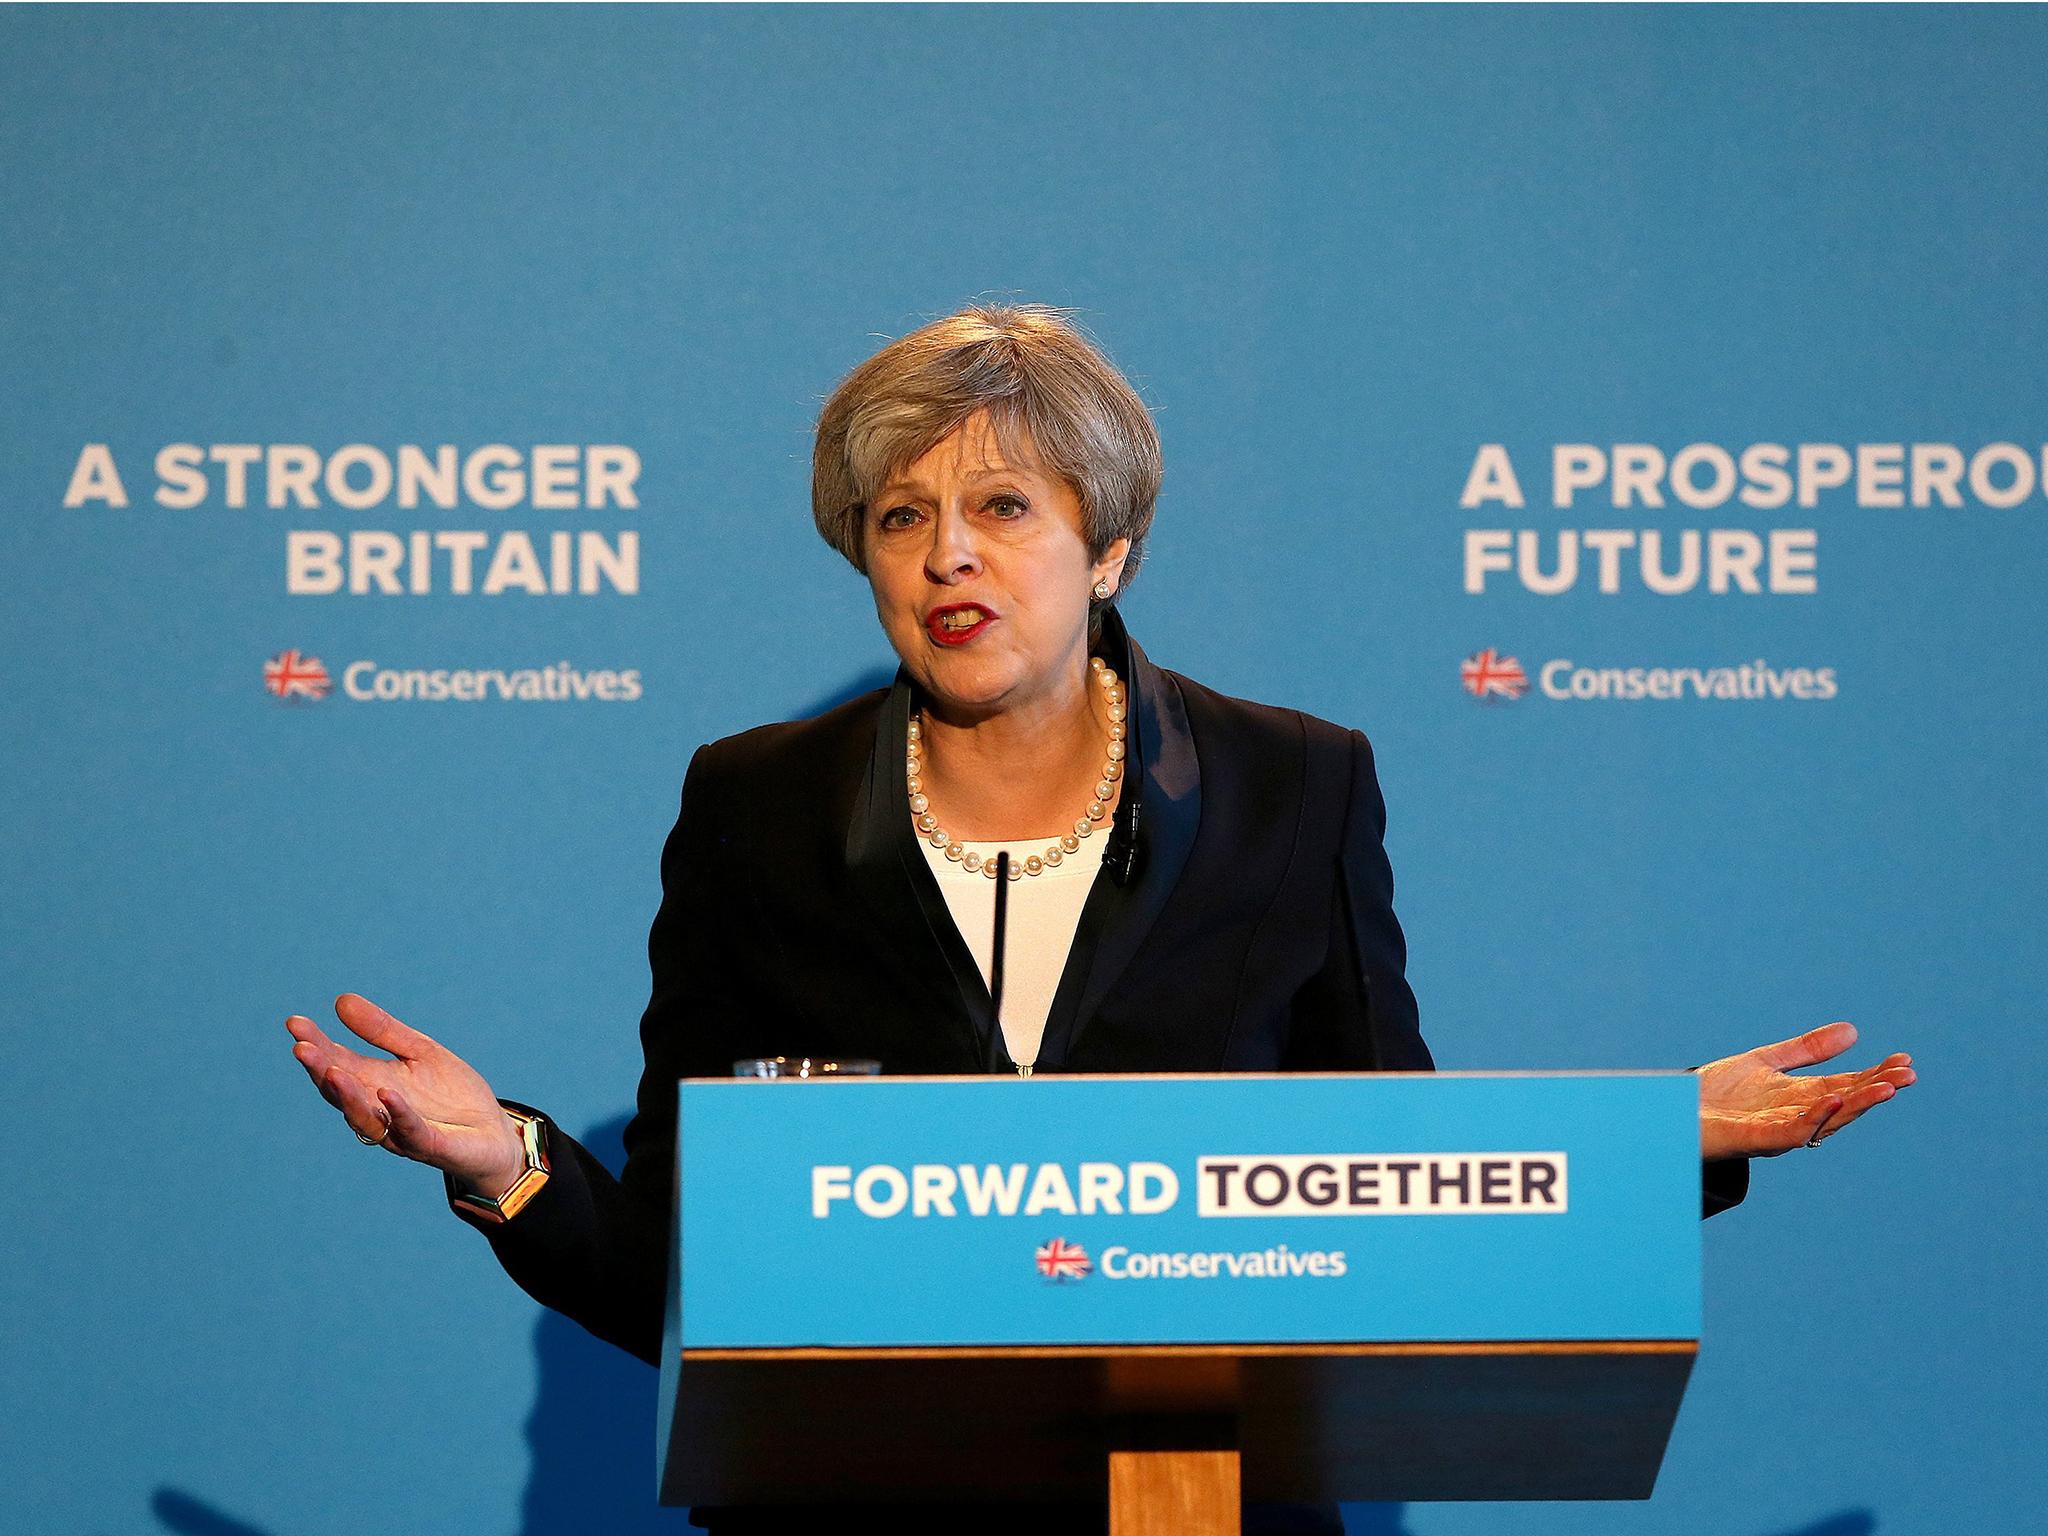 The Prime Minister launching the Conservative Party manifesto